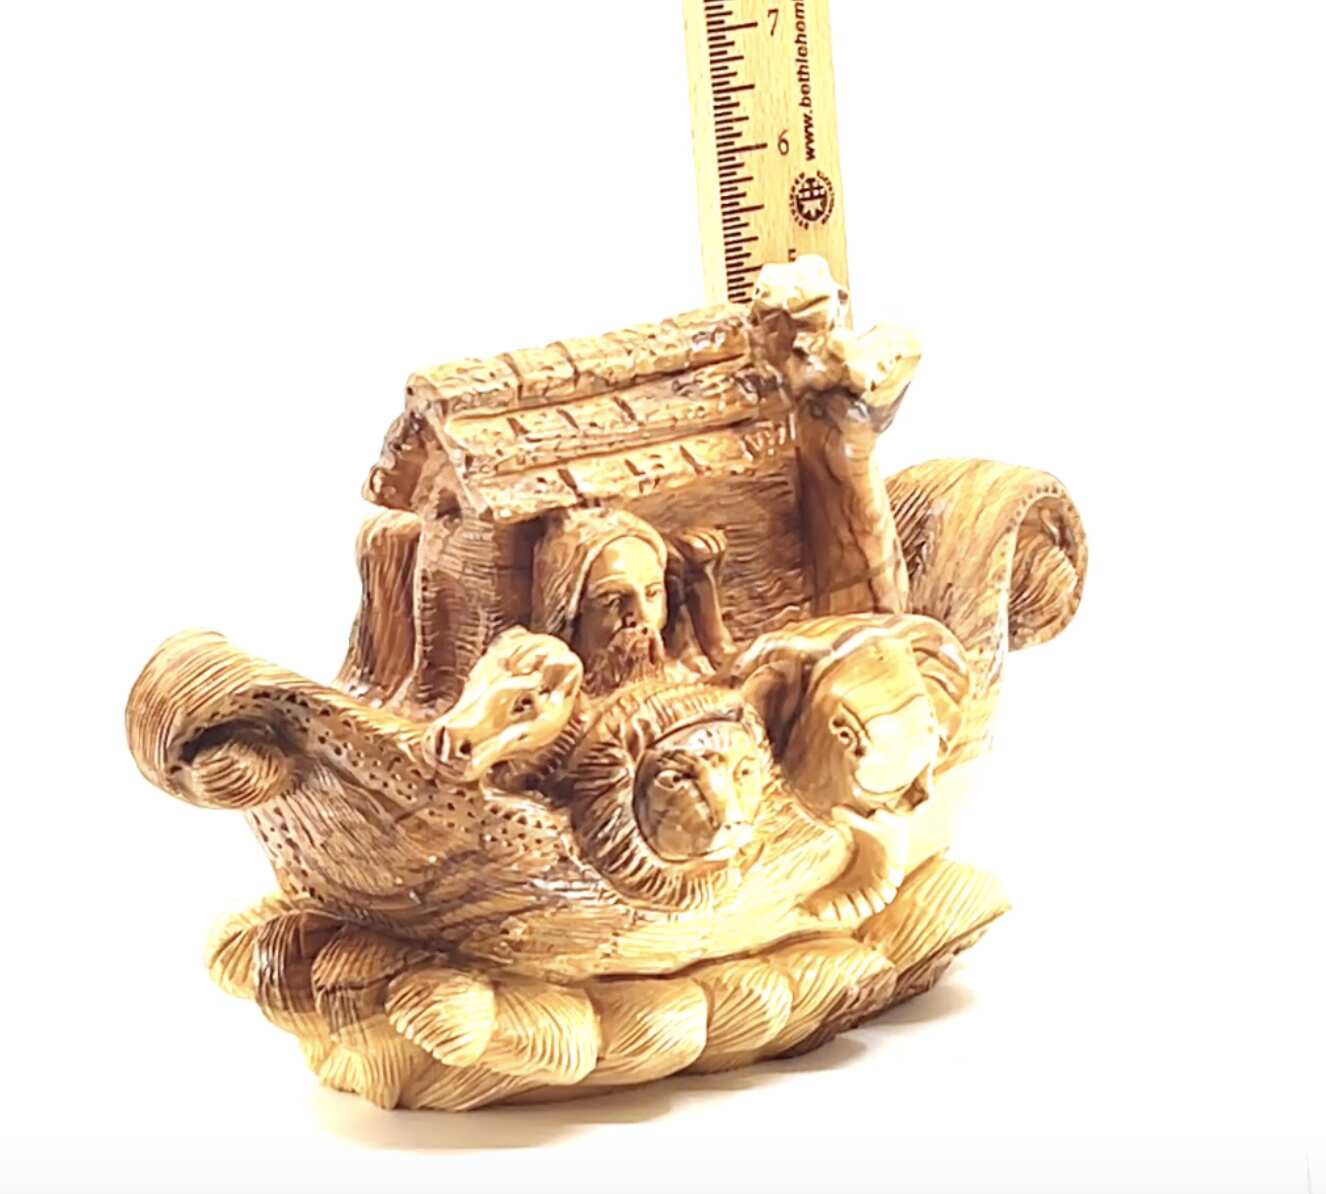 Noah's Ark with Animals Carving 4.5" Olive Wood Hand Carved Statue from the Holy Land